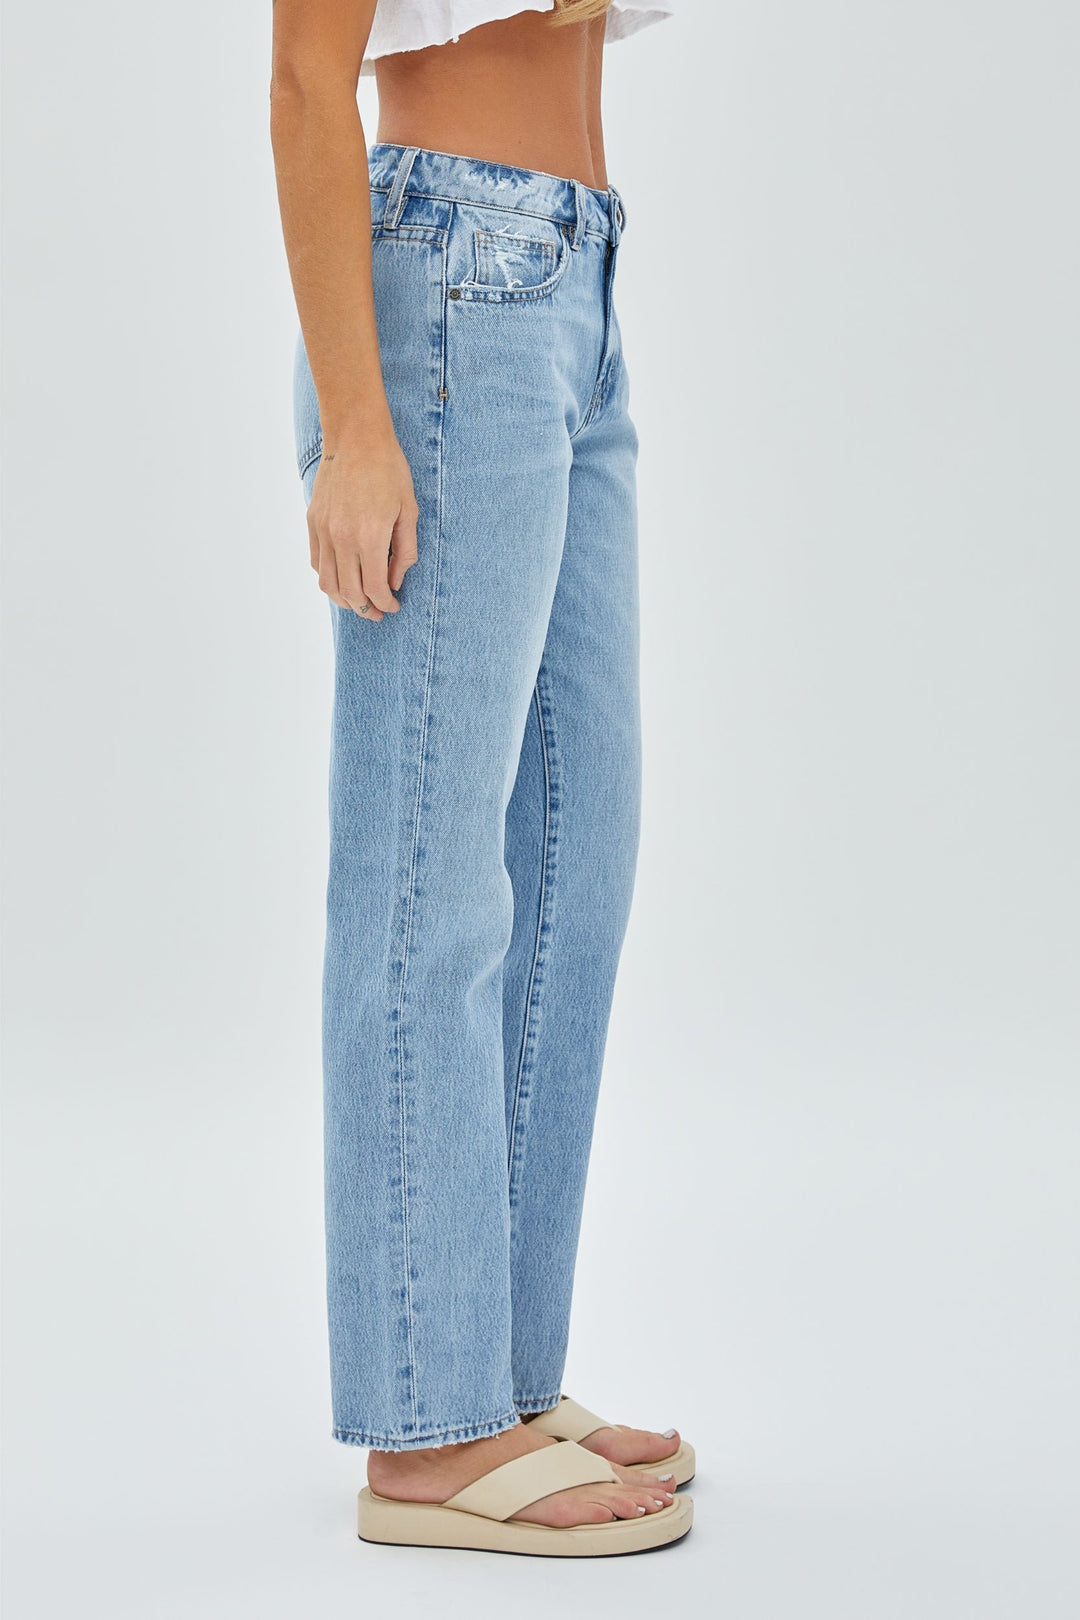 Hidden Jeans Tracey High Rise Straight Jean - Light Wash